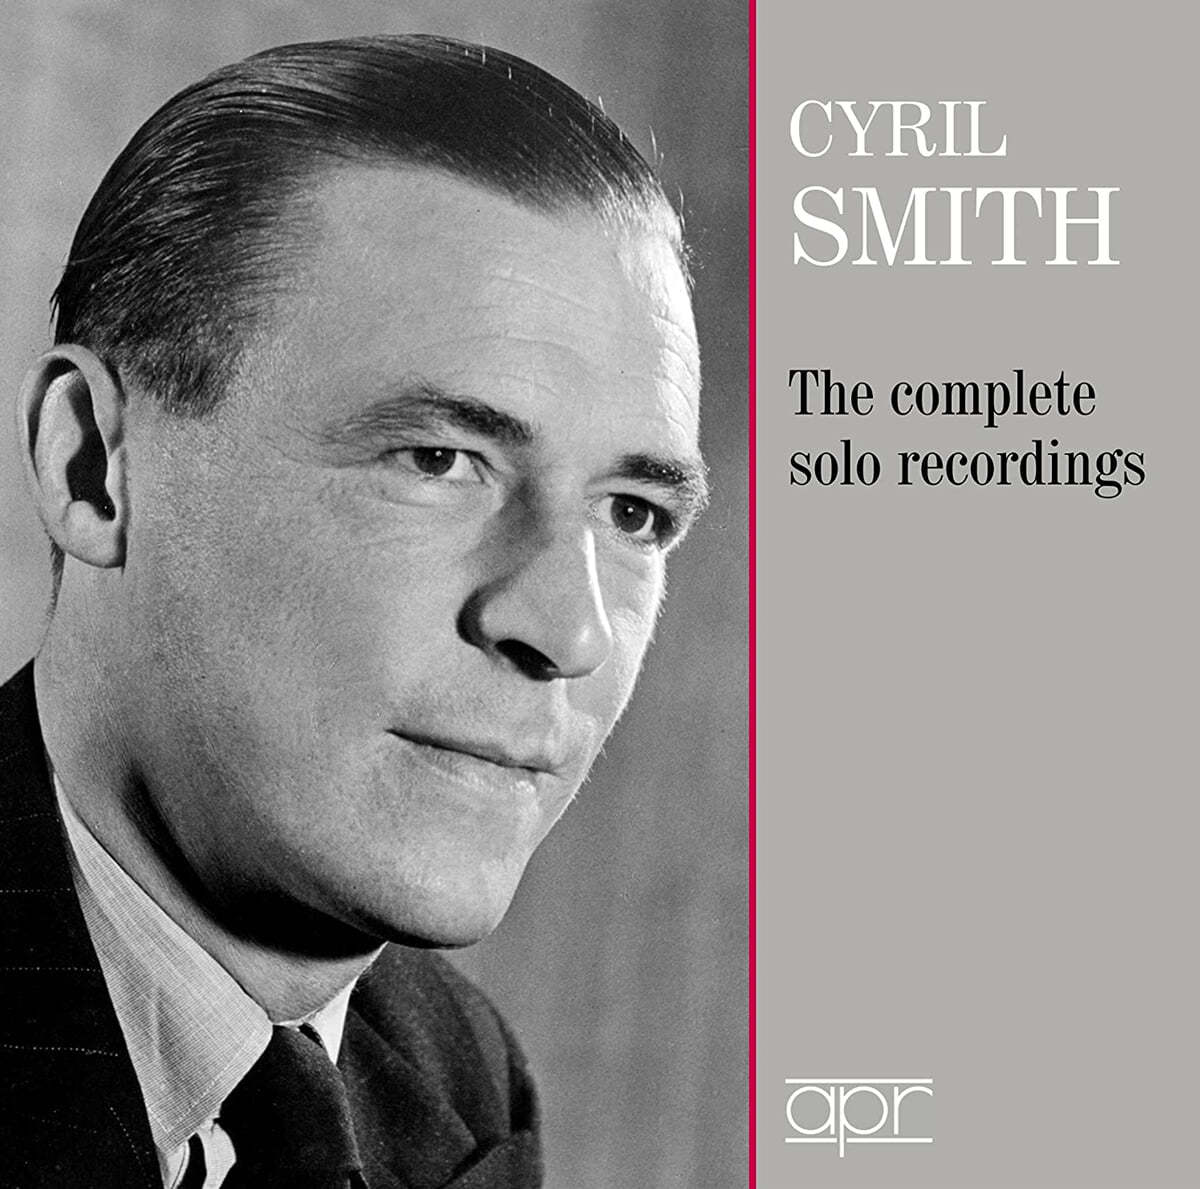 Cyril Smith 시릴 스미스 - 솔로 녹음집 (The Complete Solo Recordings) 